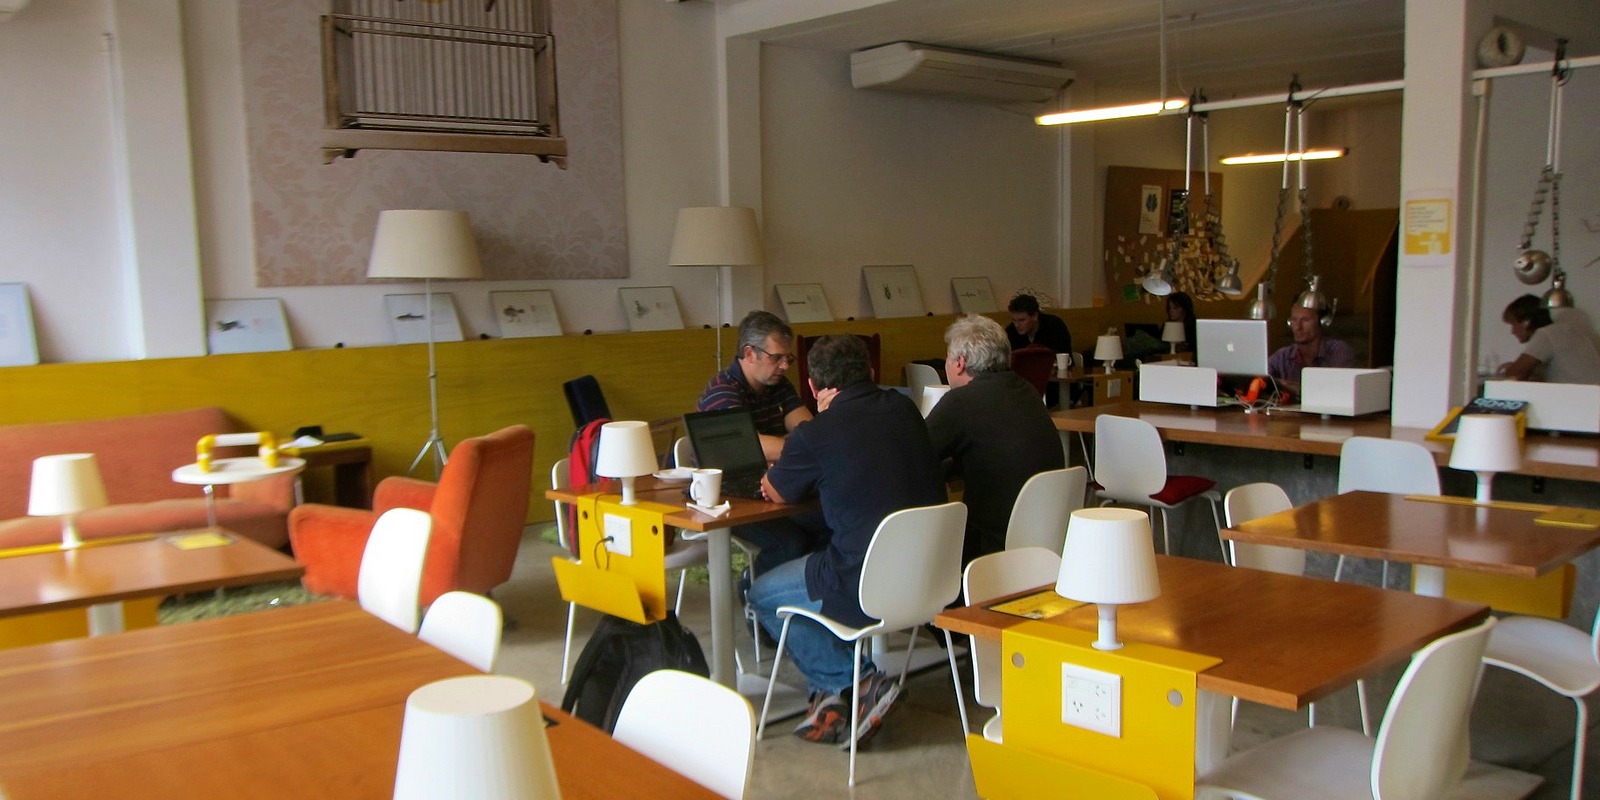 Urban_Station_Coworking (Image by Jennifer Morrow [CC BY 2.0] via Flickr